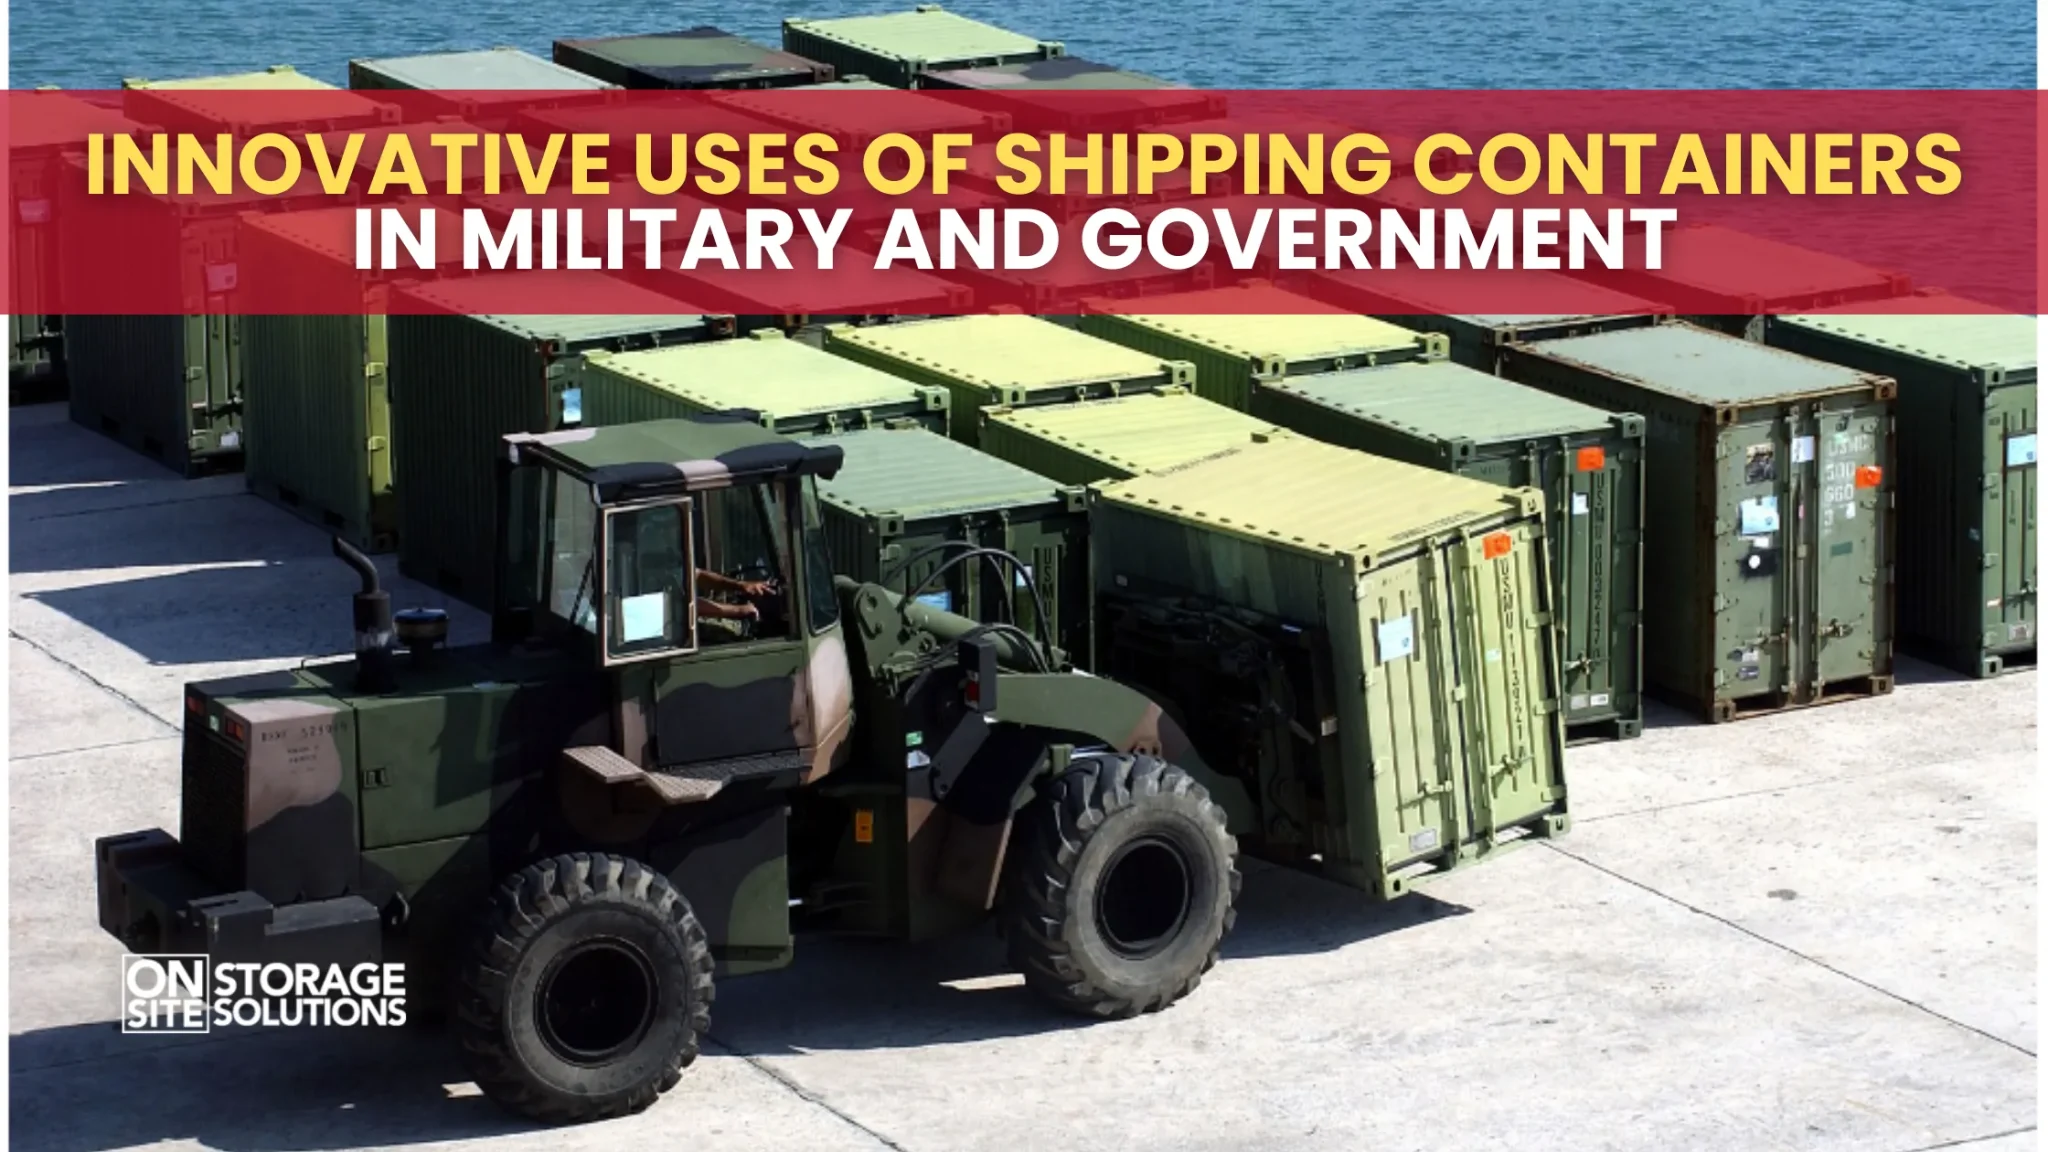 Innovative Uses of Shipping Containers in Military and Government